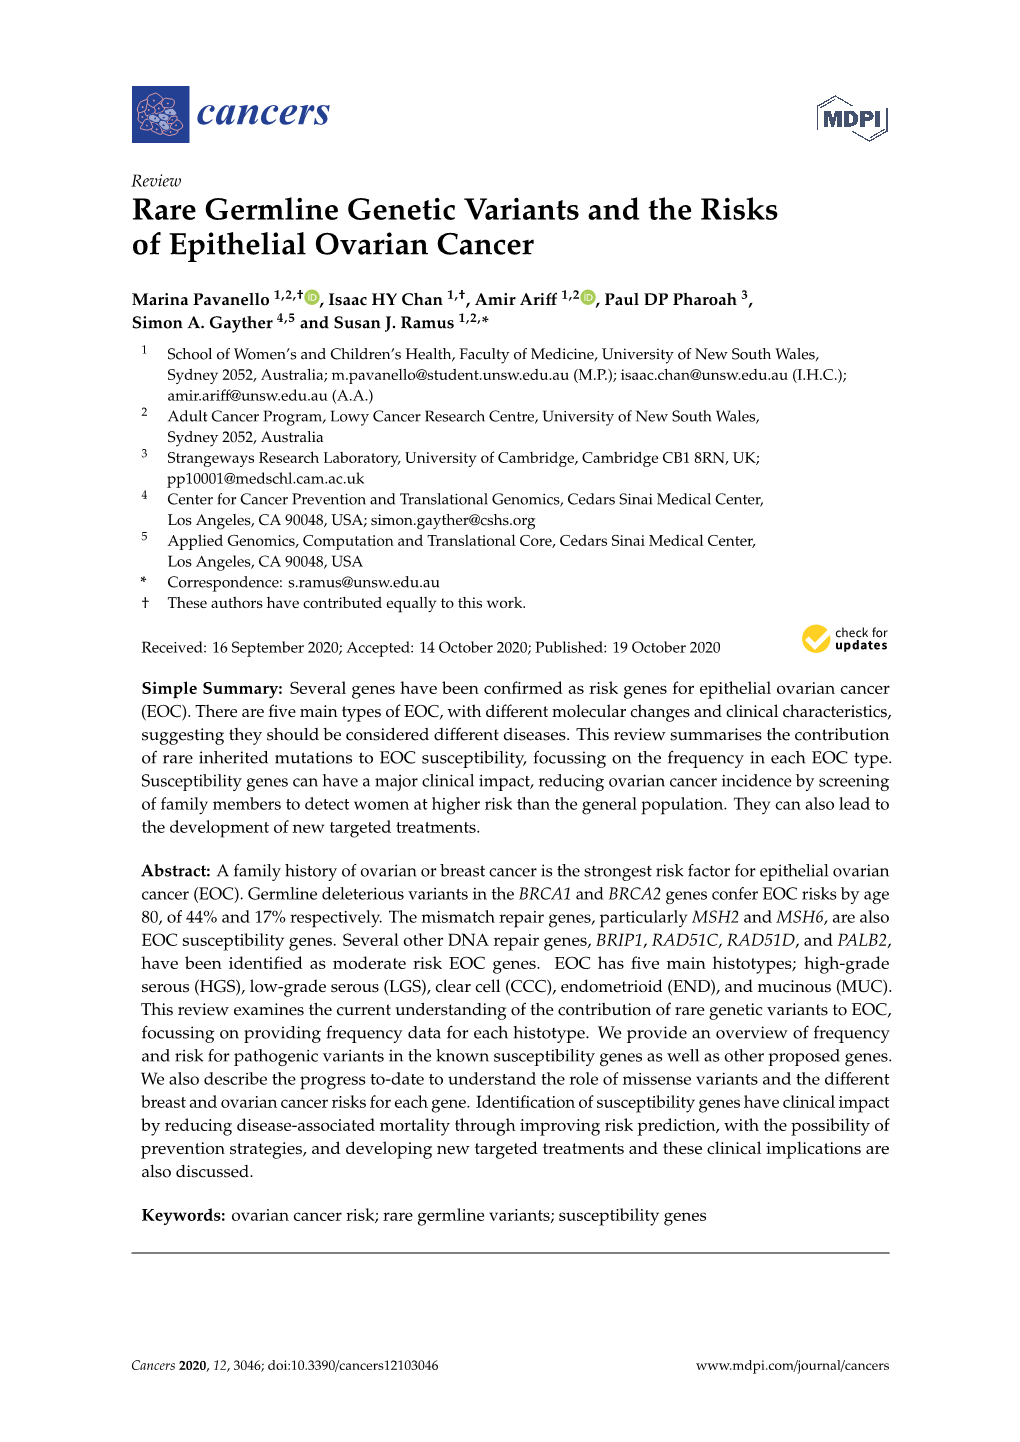 Rare Germline Genetic Variants and the Risks of Epithelial Ovarian Cancer